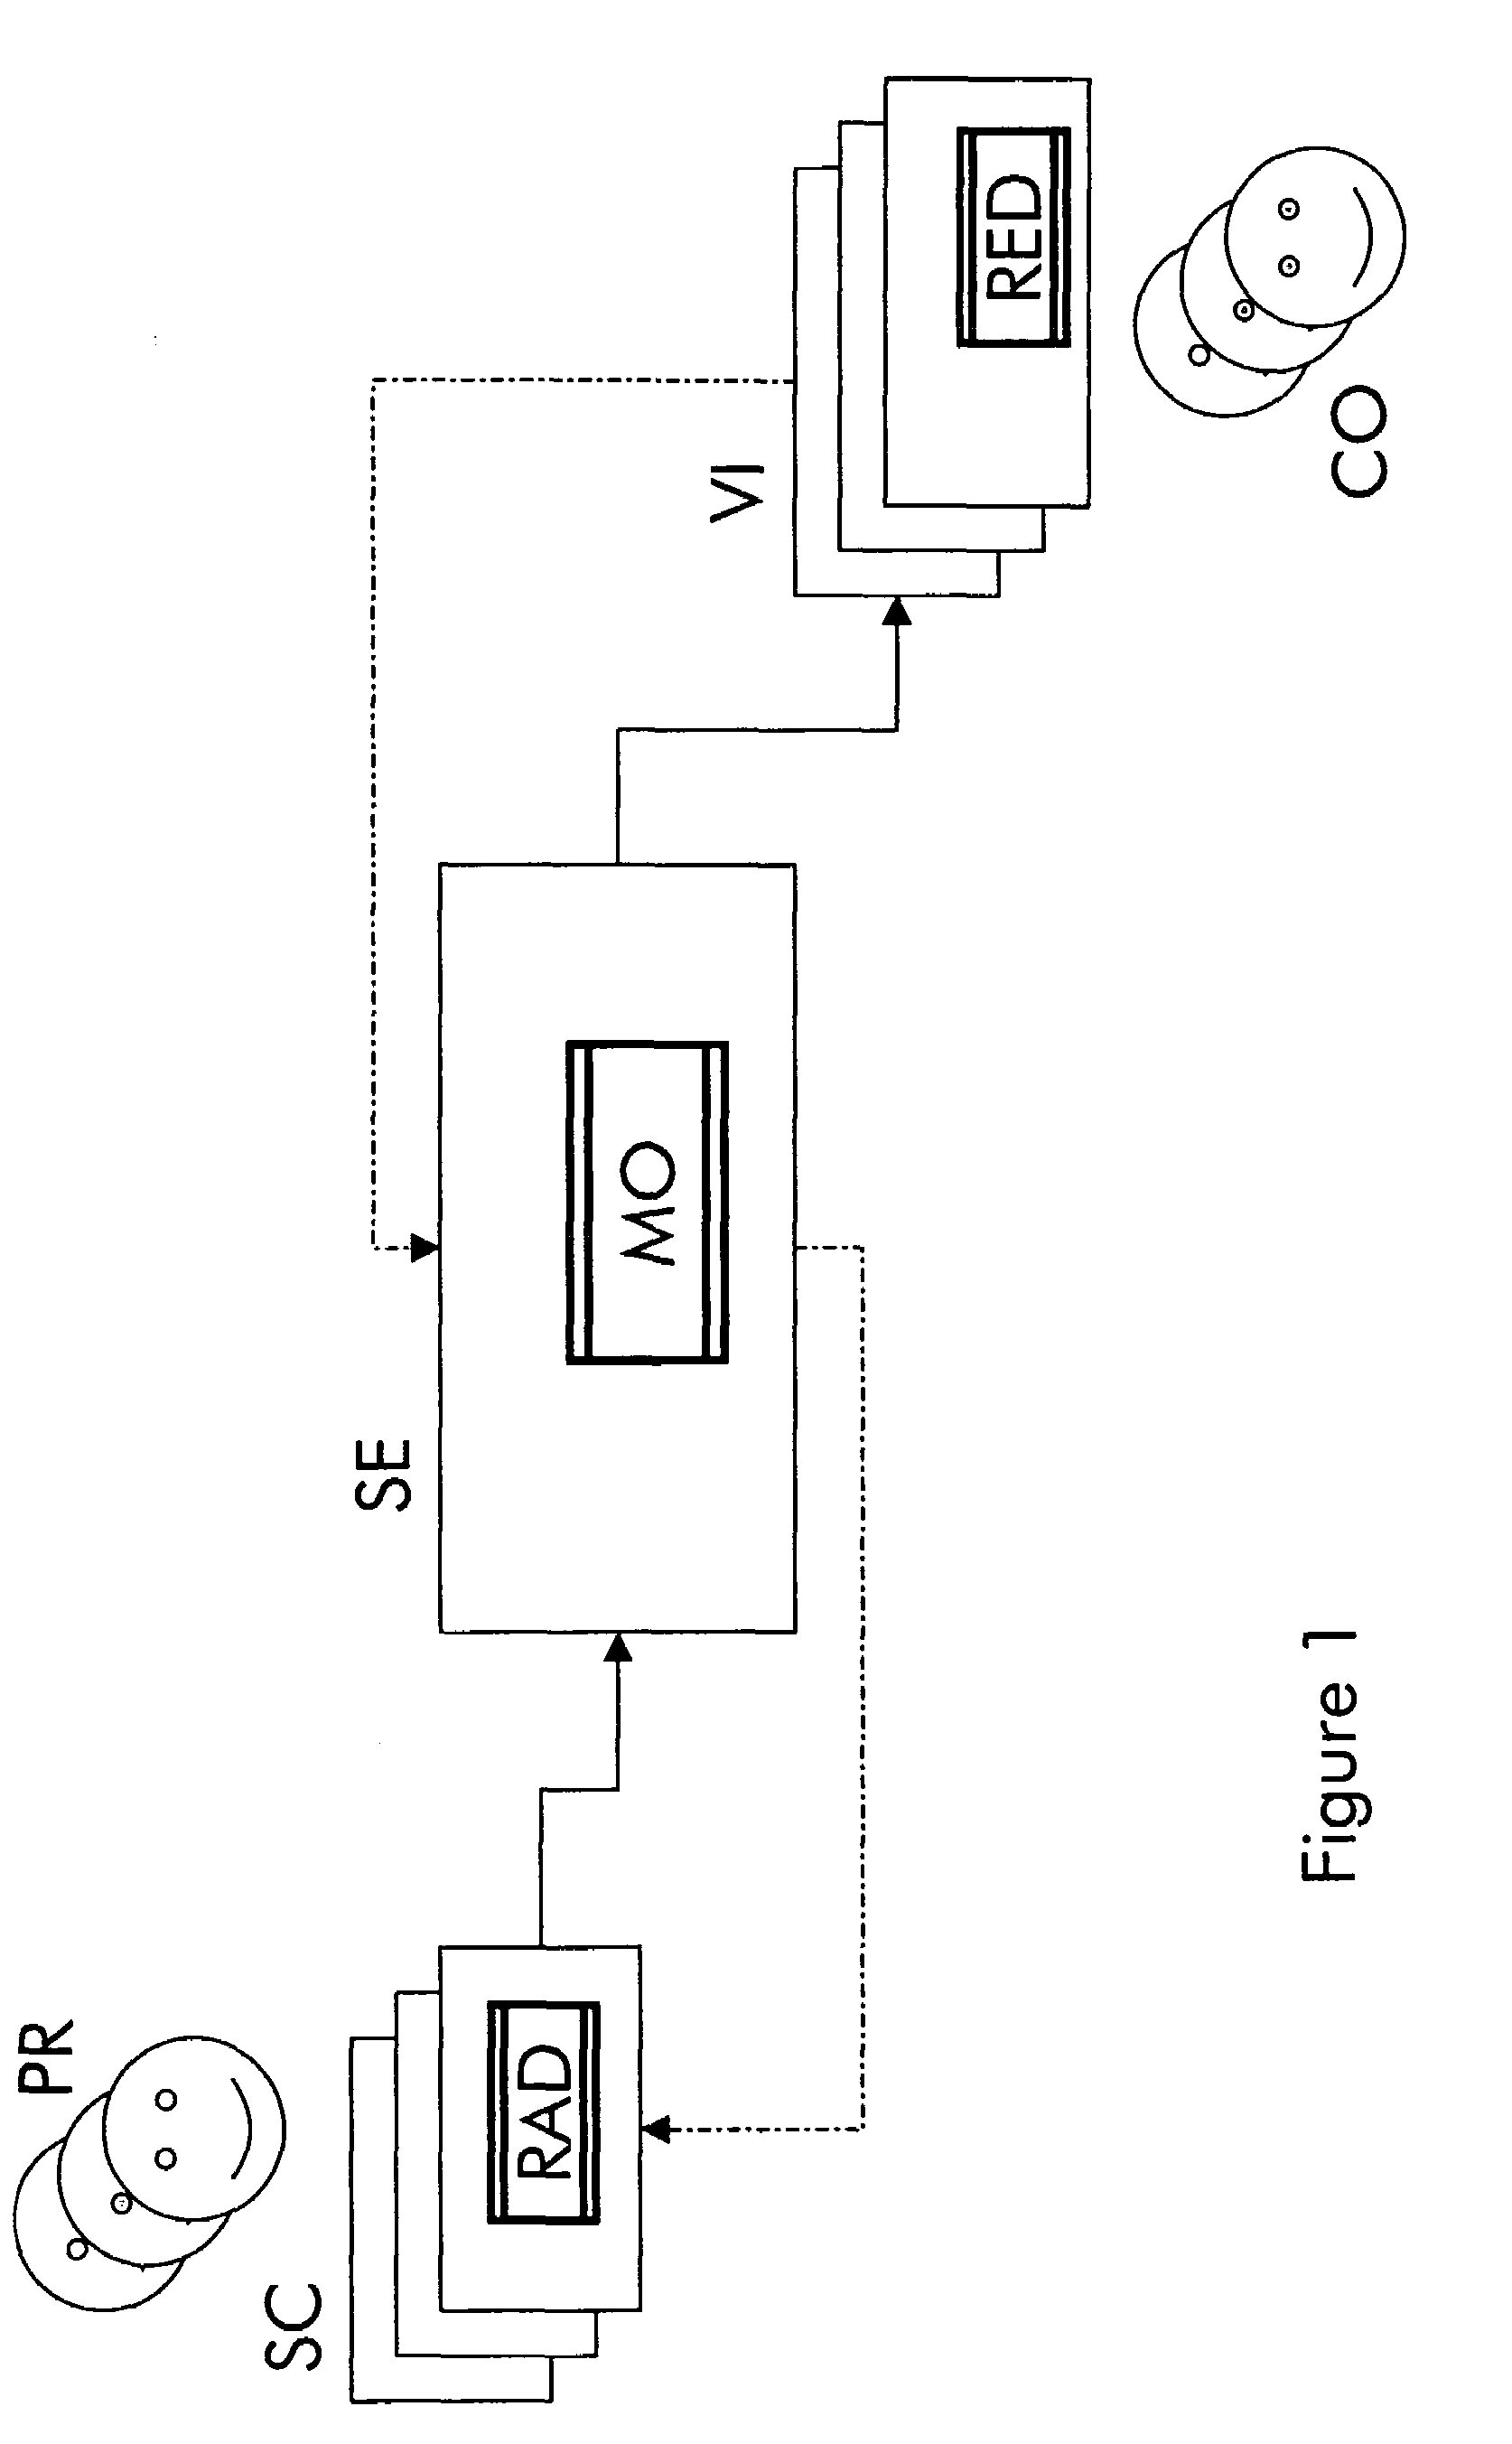 Video conference system and a method for providing an individual perspective view for a participant of a video conference between multiple participants